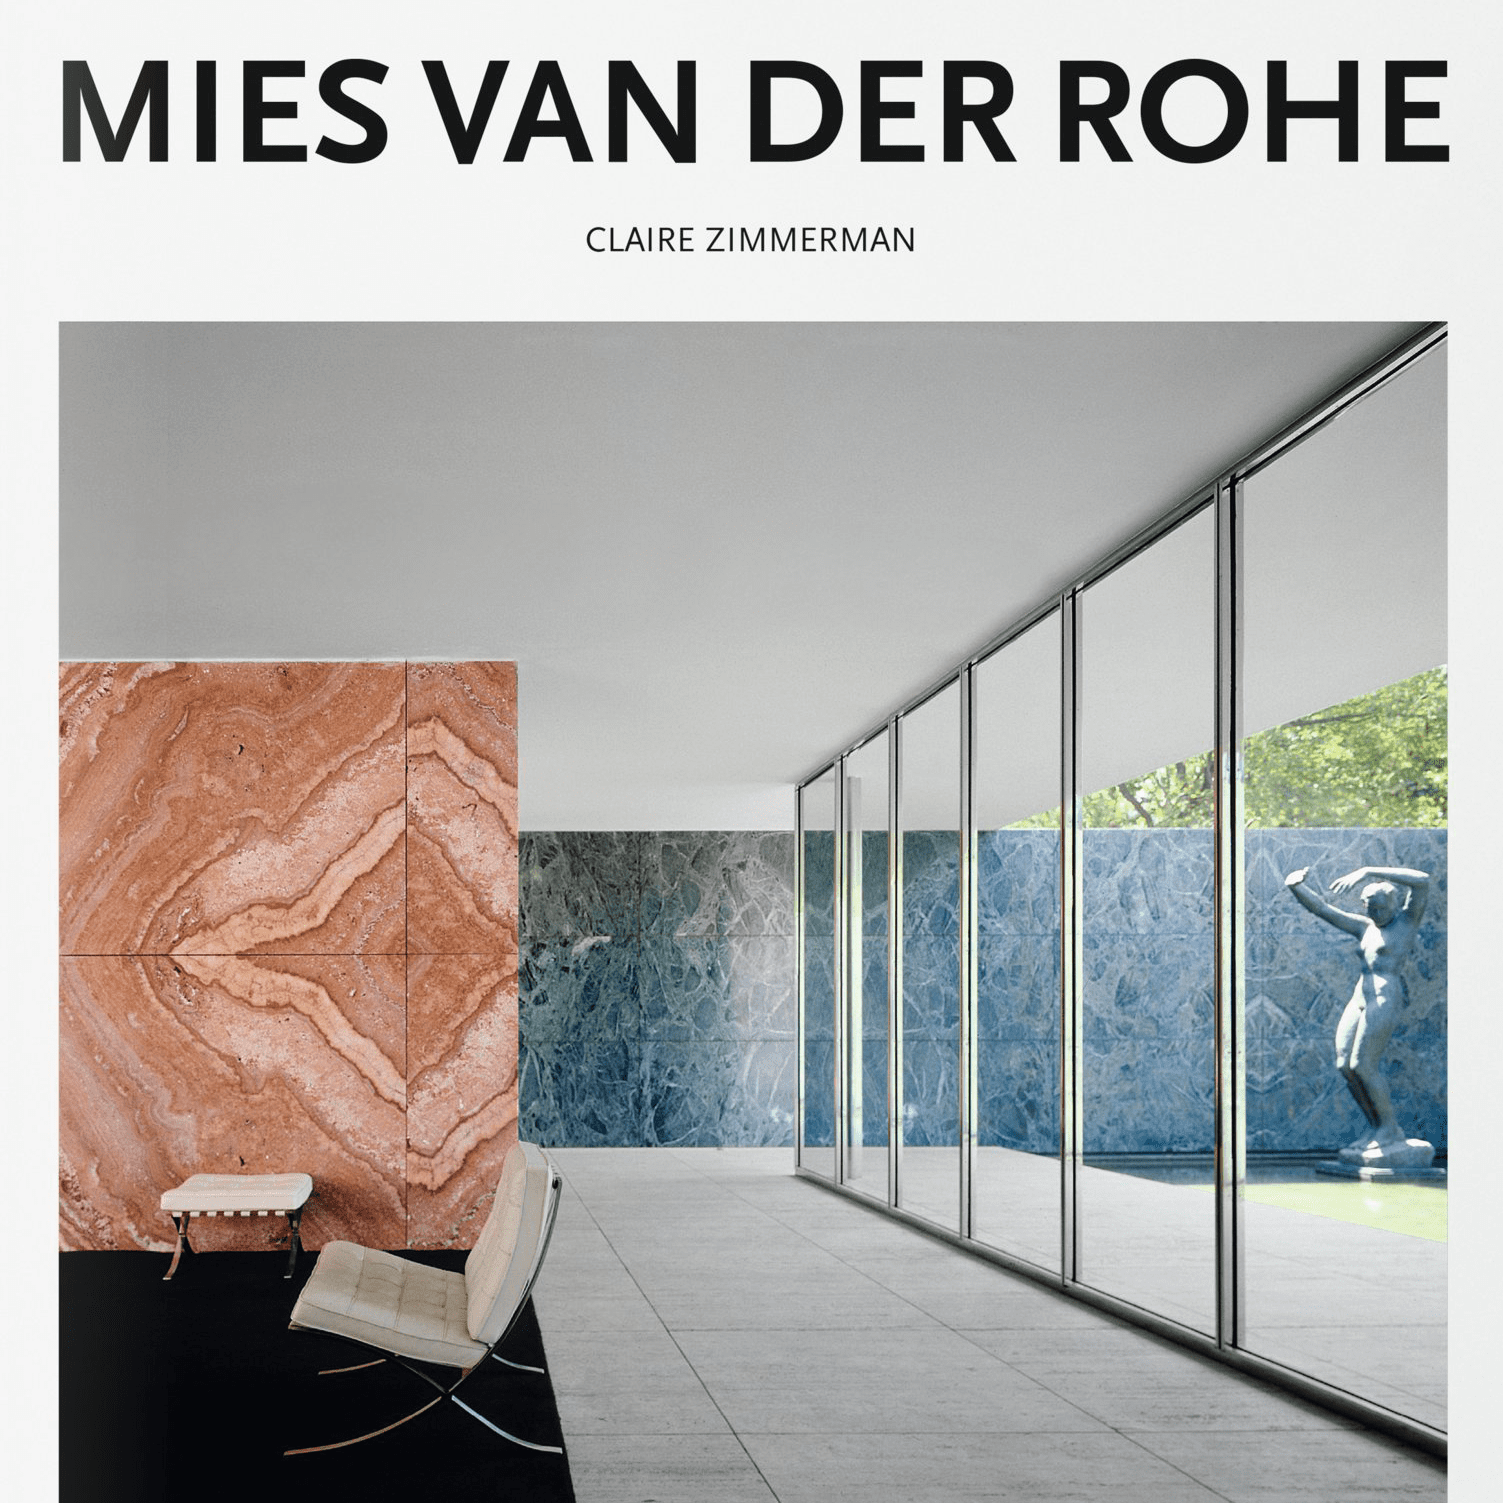 Mies van der Rohe's projects from 1906 to 1967 की तस्वीर